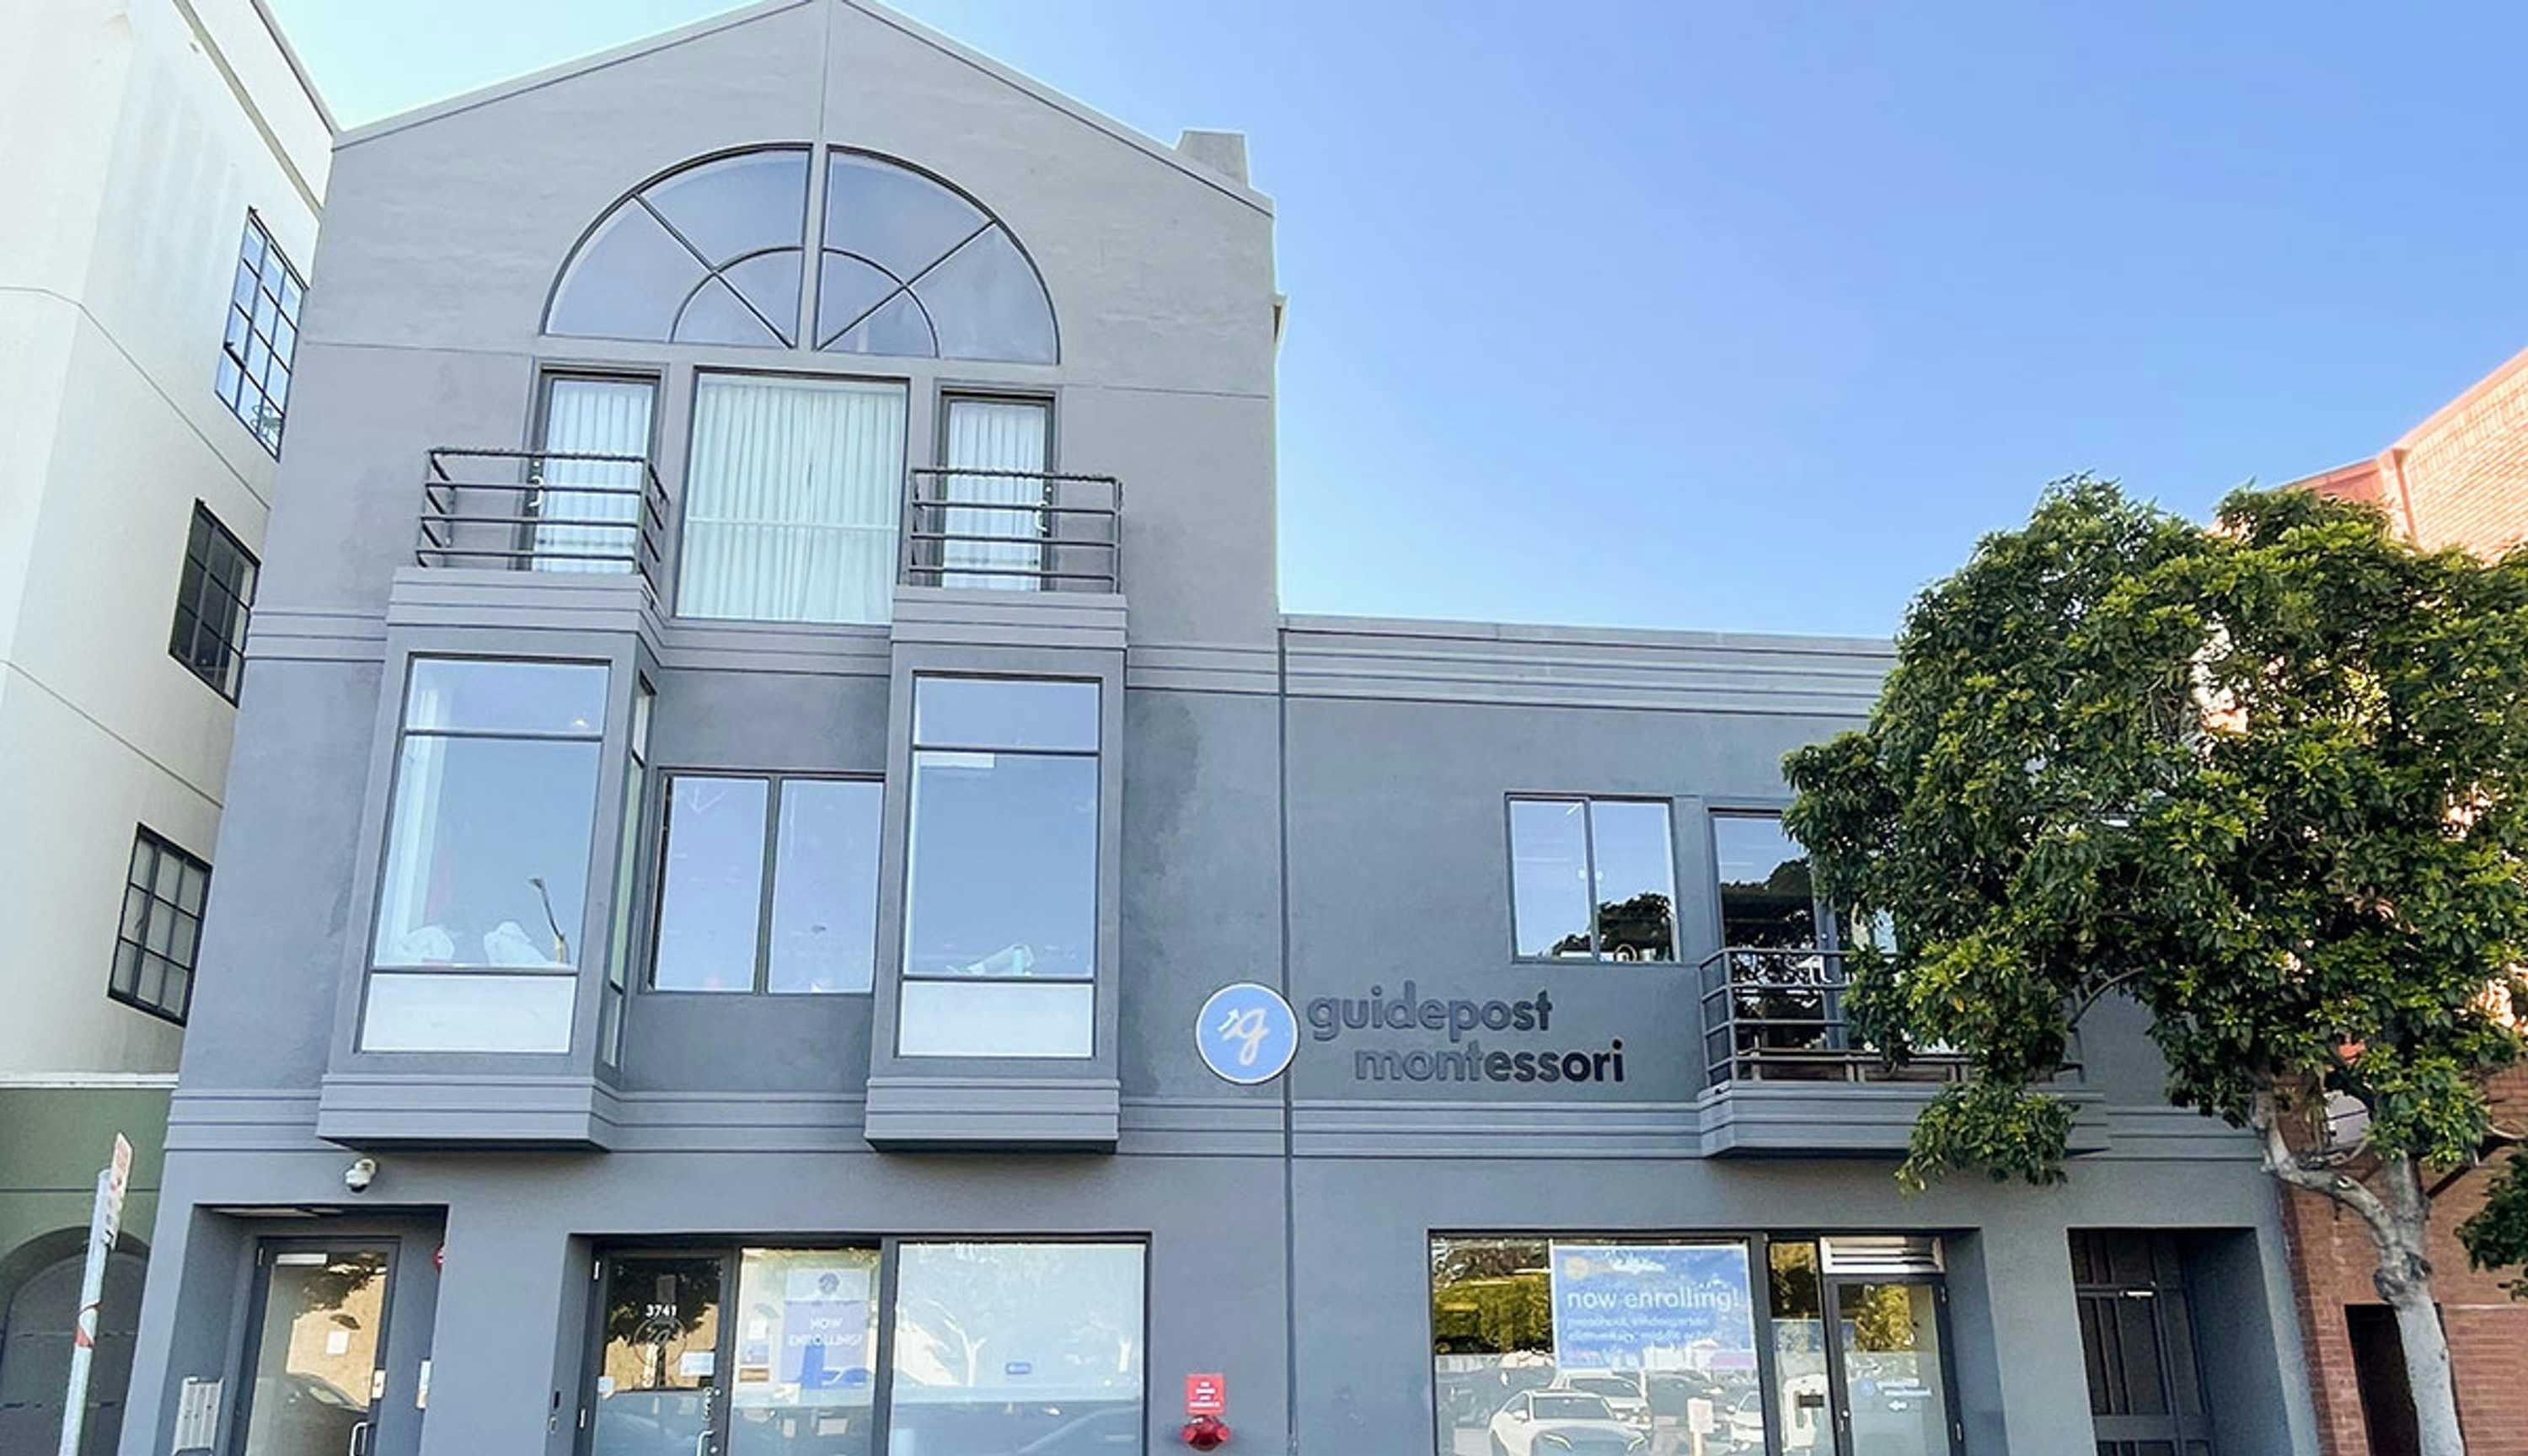 View of Guidepost Montessori at Fort Mason from the street that shows the tall gray, windowed exterior entrance with a large circular Guidepost Montessori branded sign